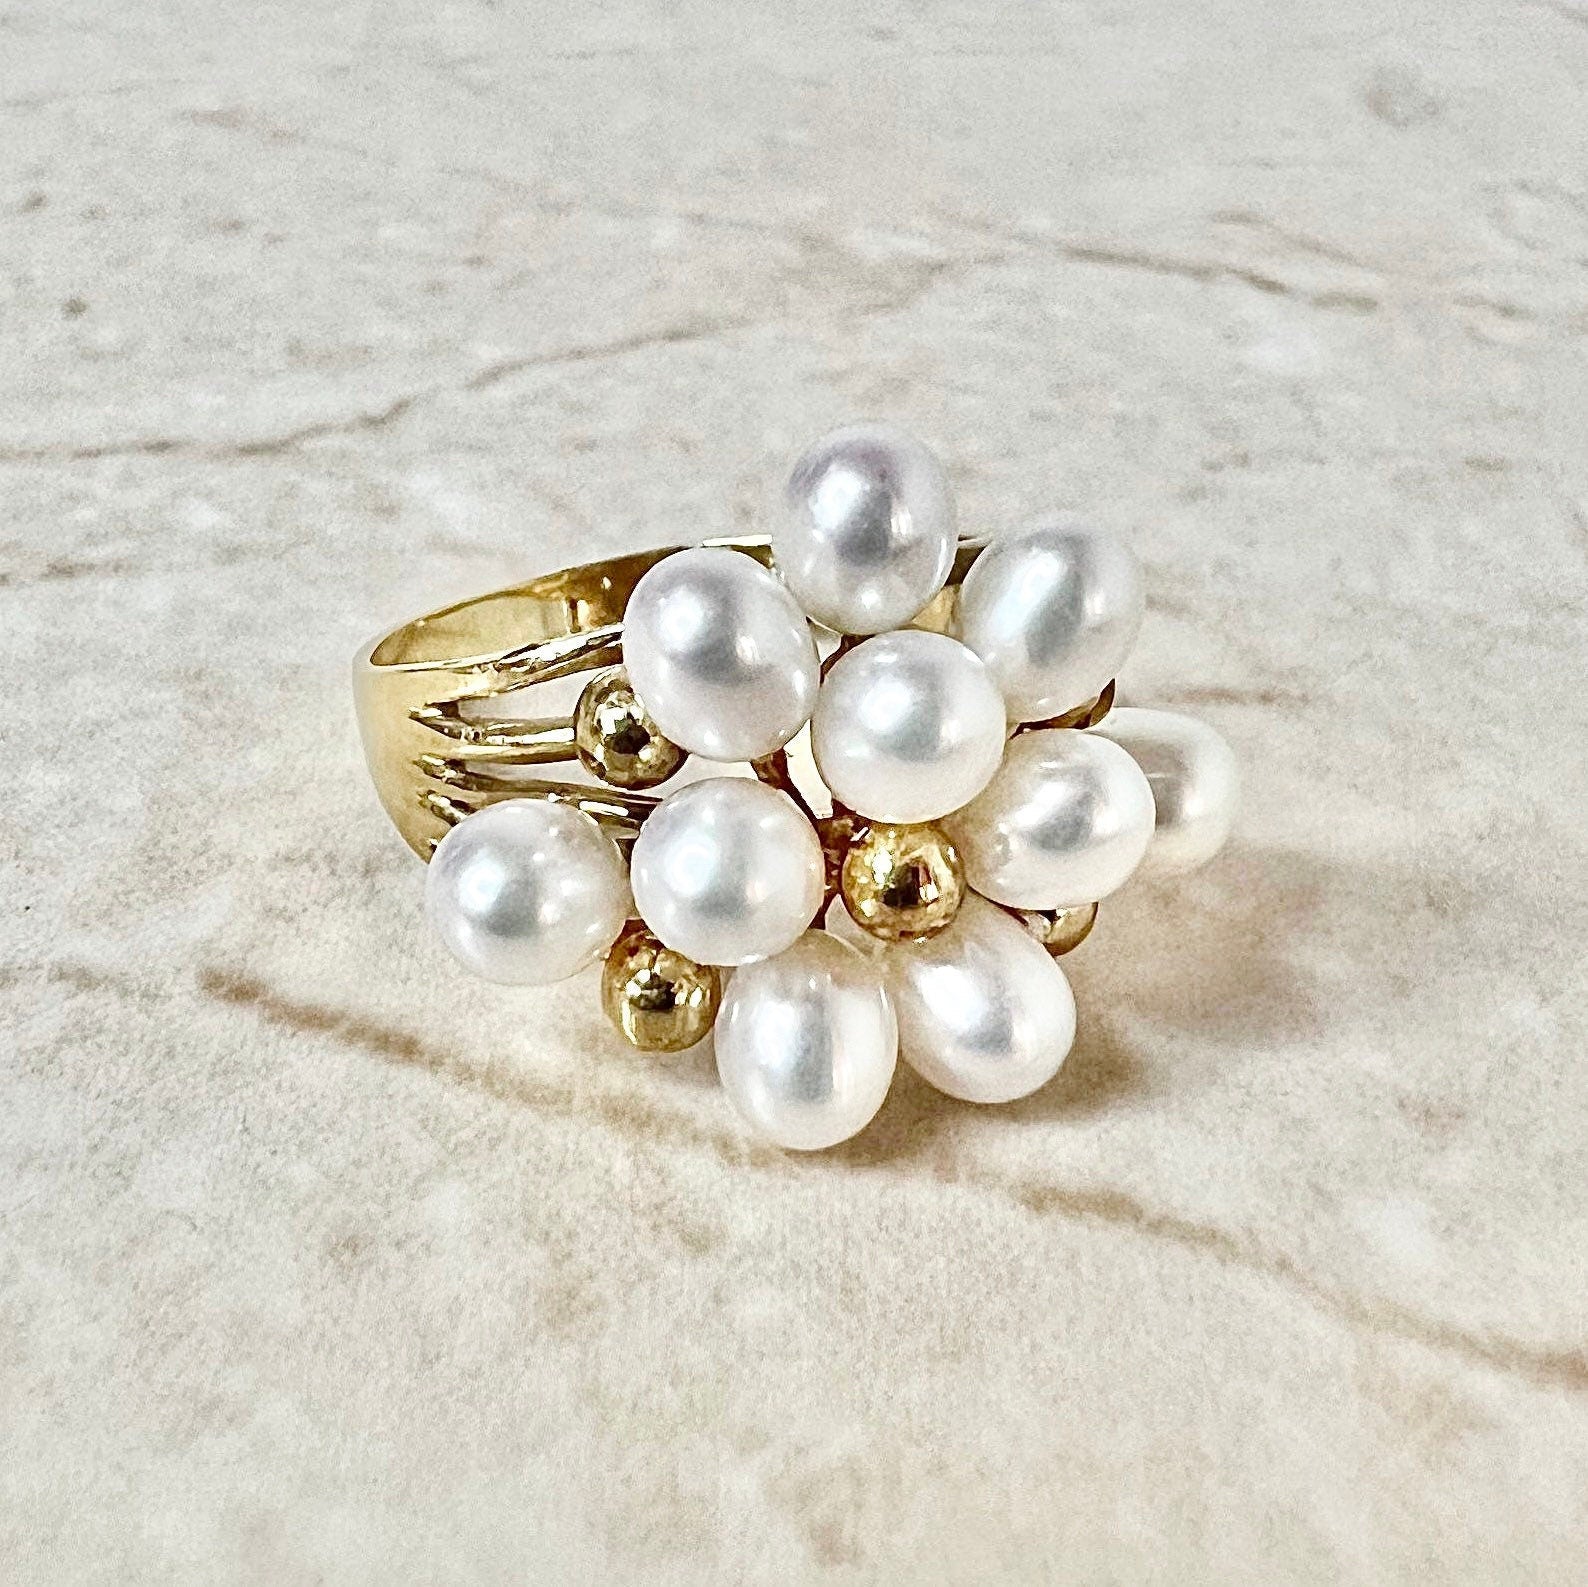 14KT Yellow Gold Freshwater Pearl Ring 914002-7 | Cravens & Lewis Jewelers  | Georgetown, KY